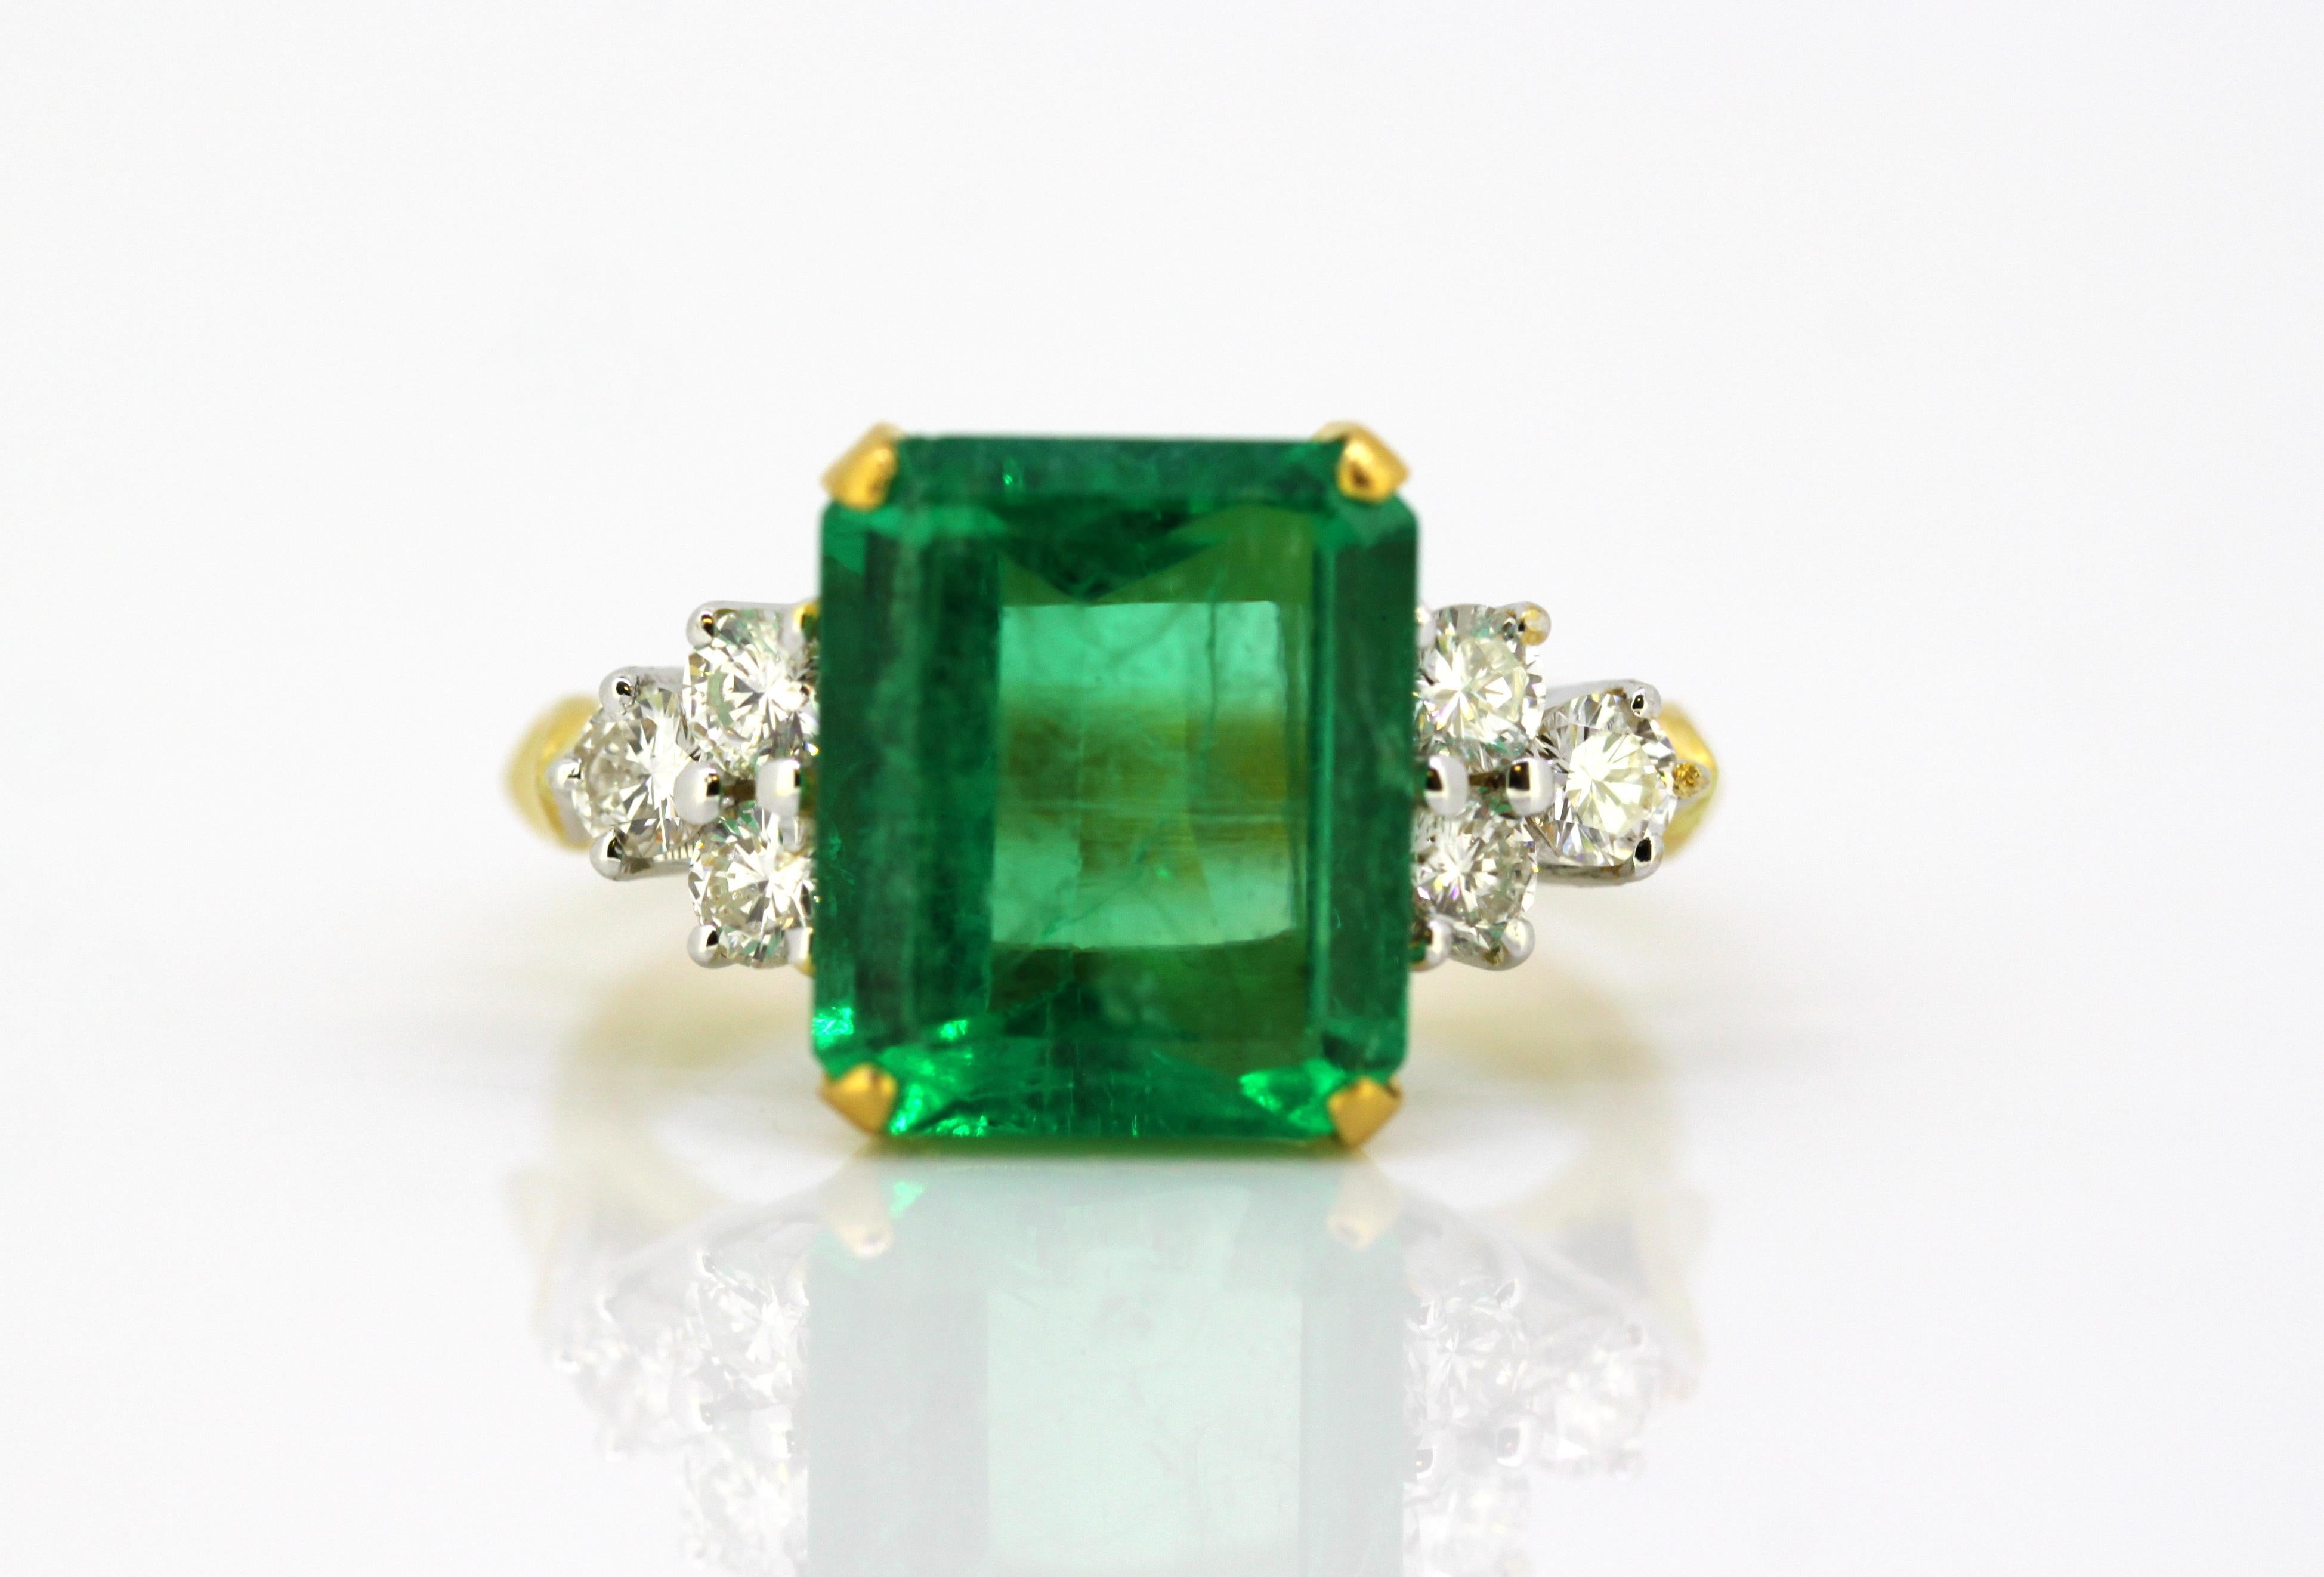 18k yellow gold ladies ring with impressive emerald and diamonds
Made in Sheffield 1989
Maker : EF ltd
Fully hallmarked.

Dimensions -
Finger Size: (UK) = O (US) = 7 1/2 (EU) = 55 1/4
Weight: 7 g
Ring Size : 2.8 x 2.2 x 1.2 cm

Emerald- 
Cut :